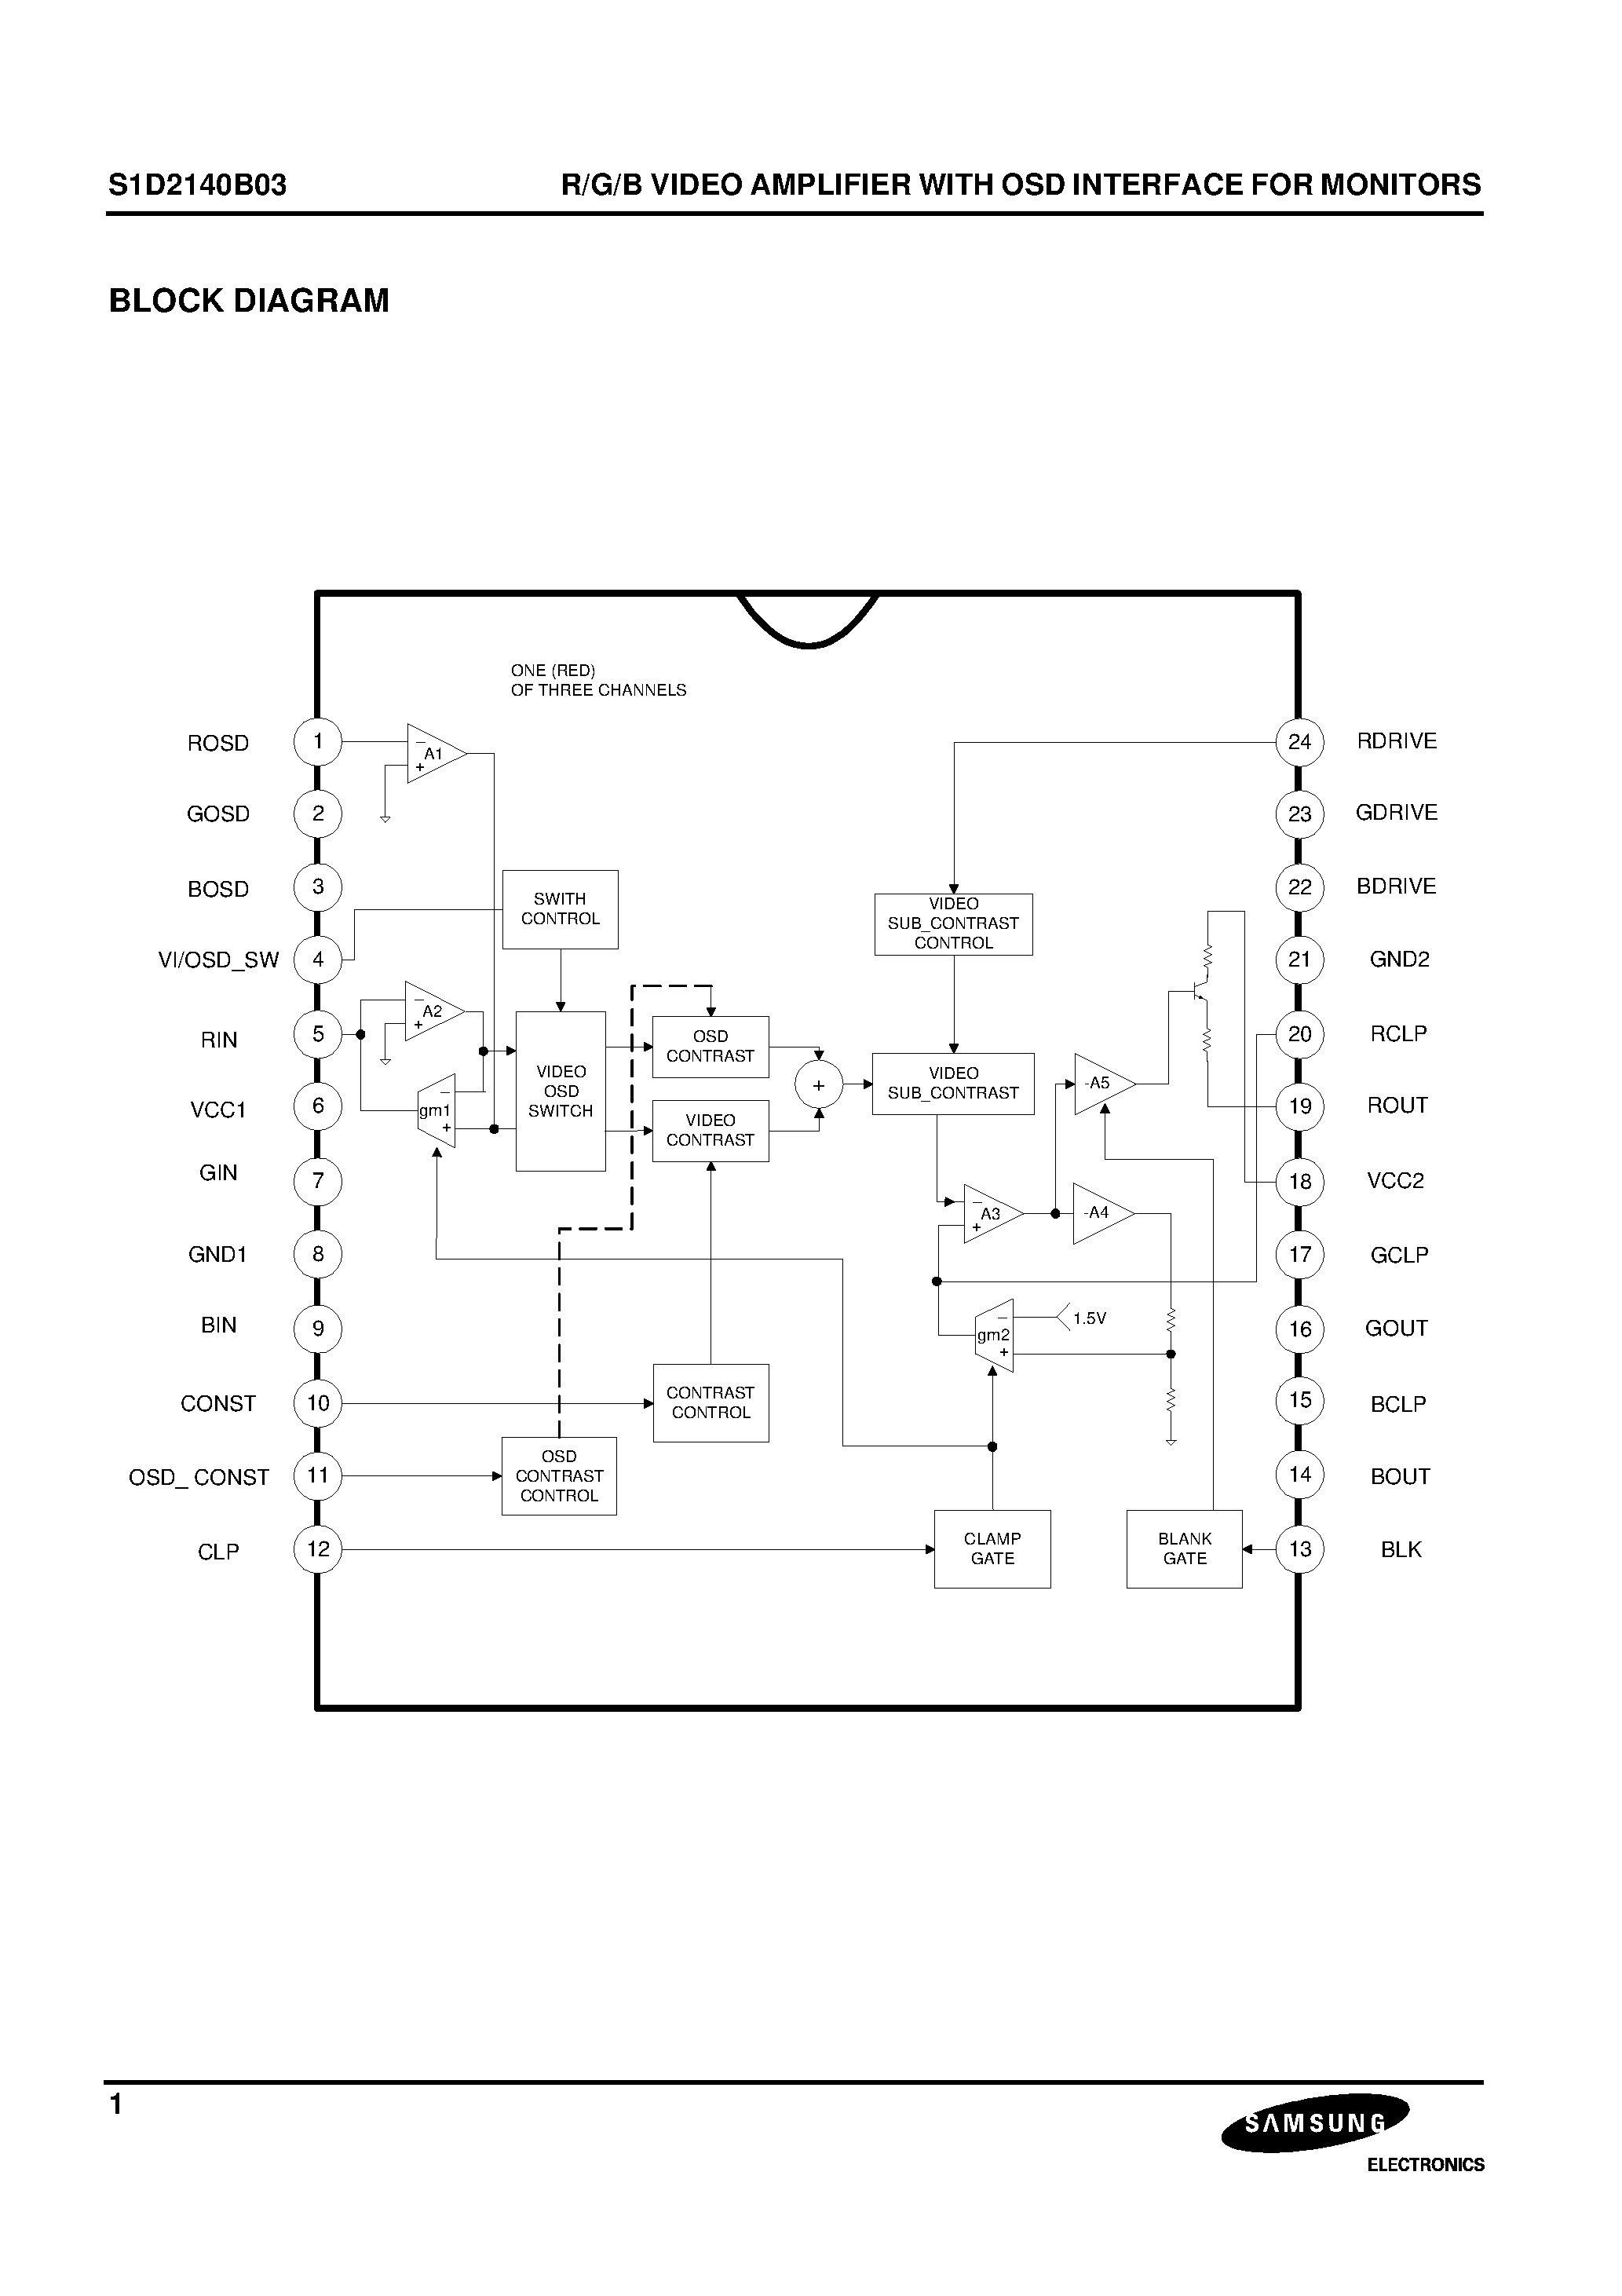 Datasheet S1D2140B03-D0B0 - R/G/B VIDEO AMPLIFIER WITH OSD INTERFACE FOR MONITORS page 2